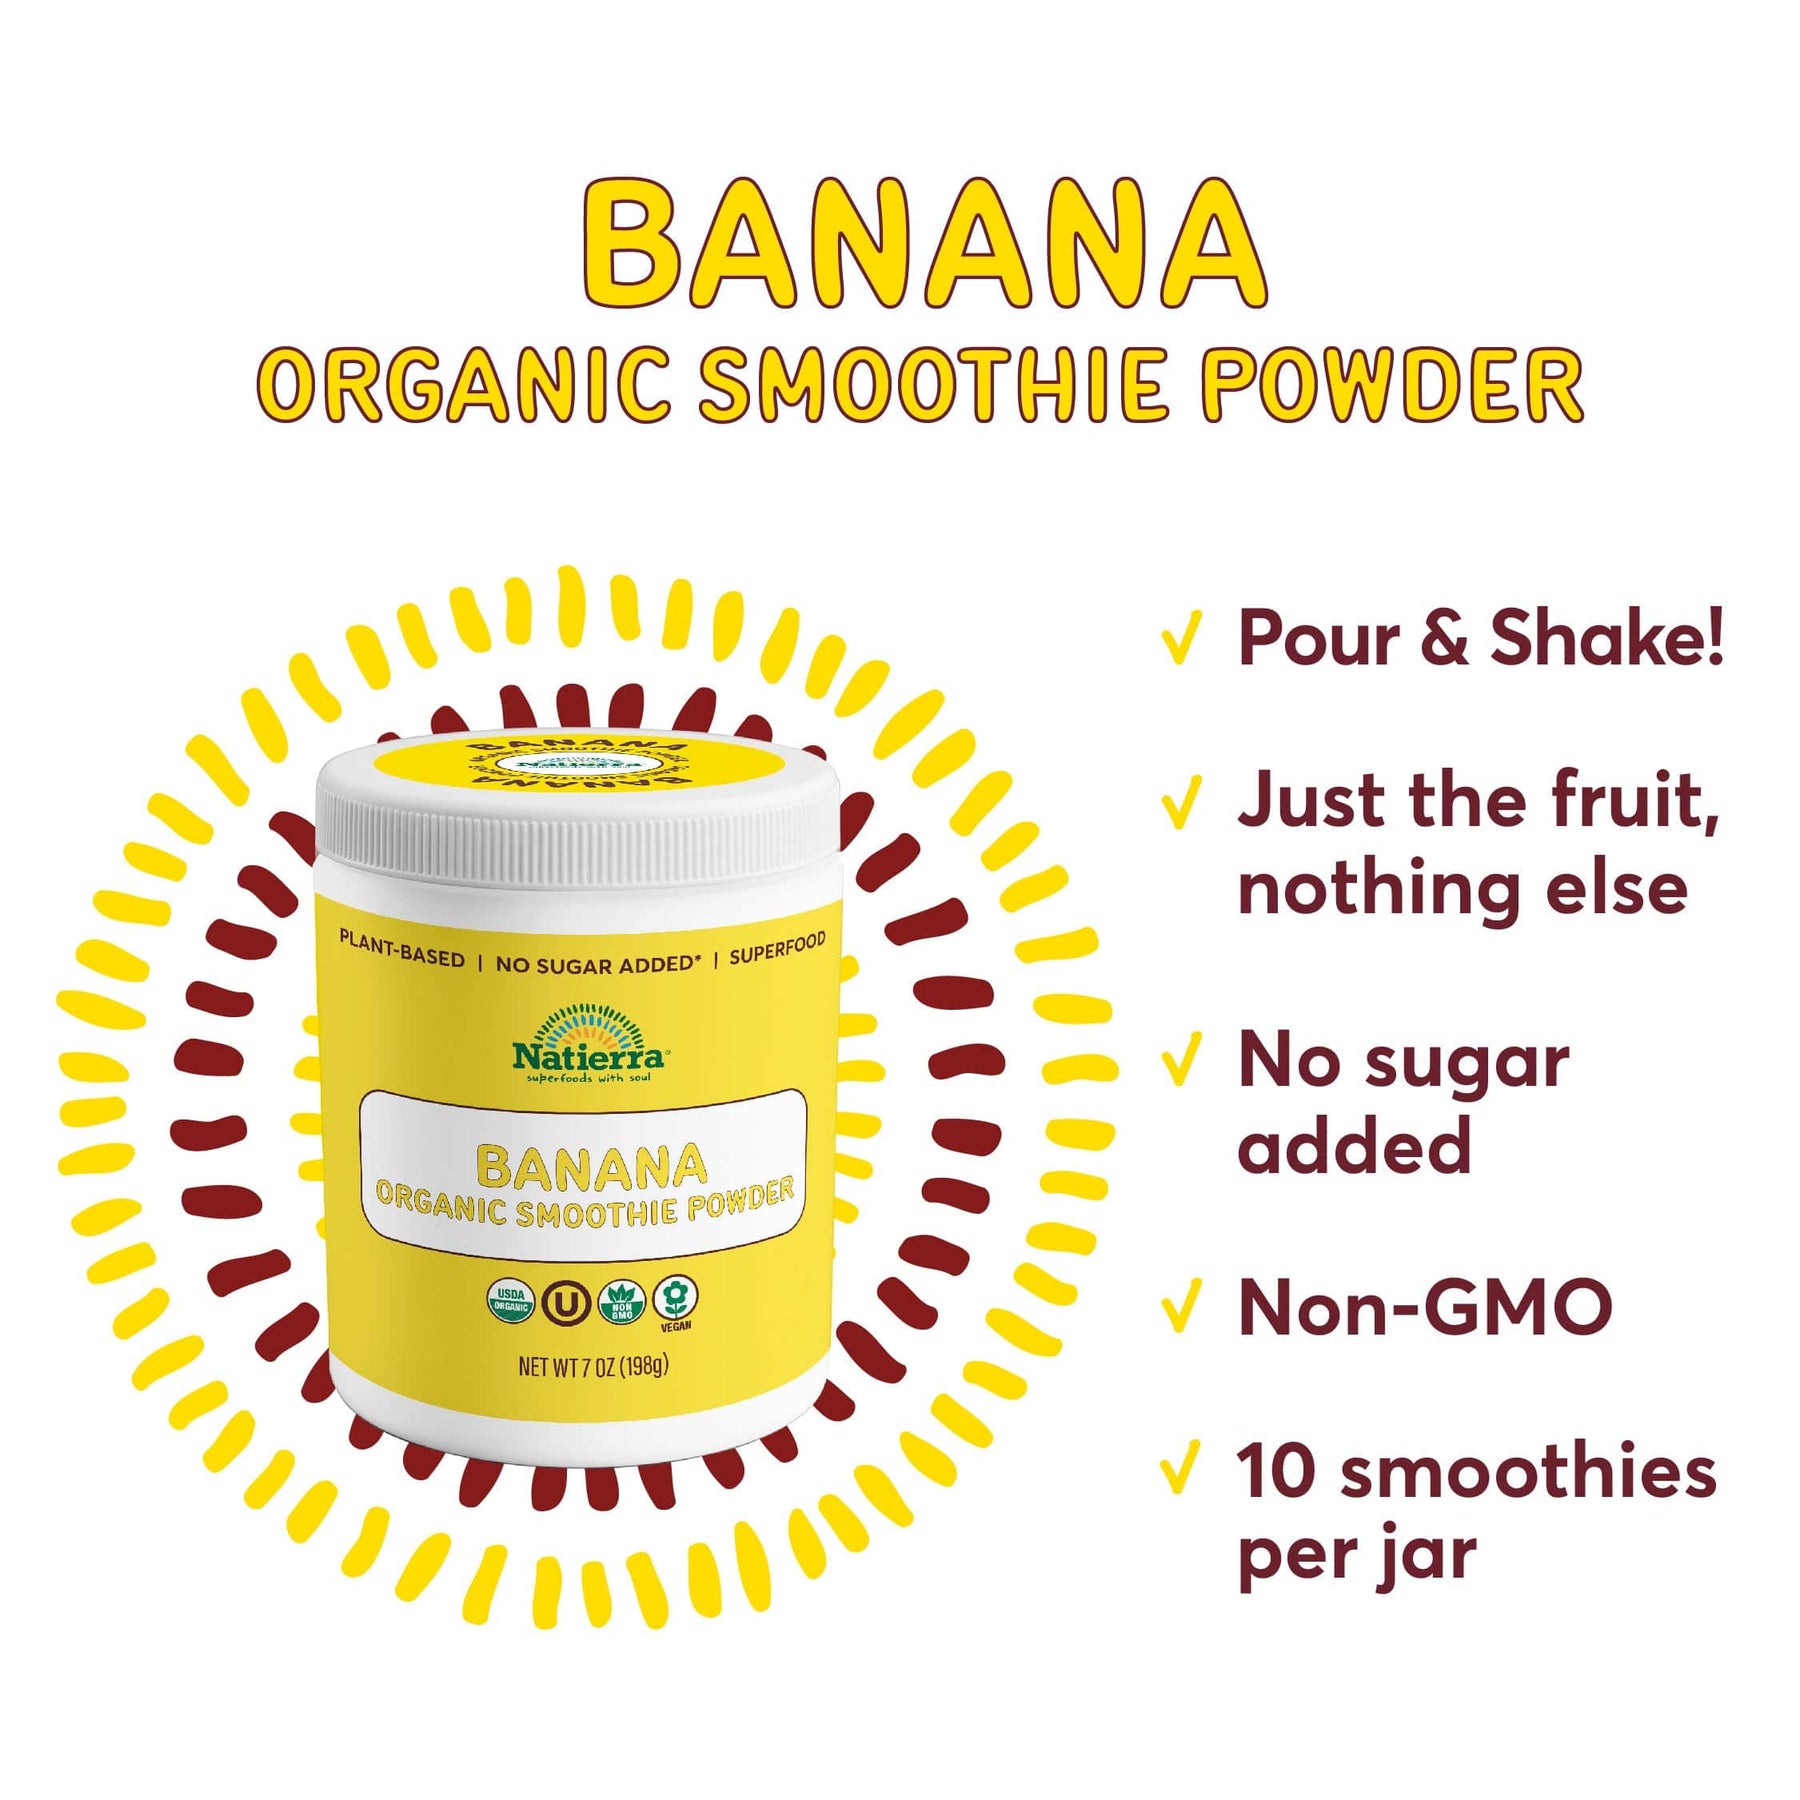 A jar of Natierra Banana Organic Smoothie Powder next to list of main product claims